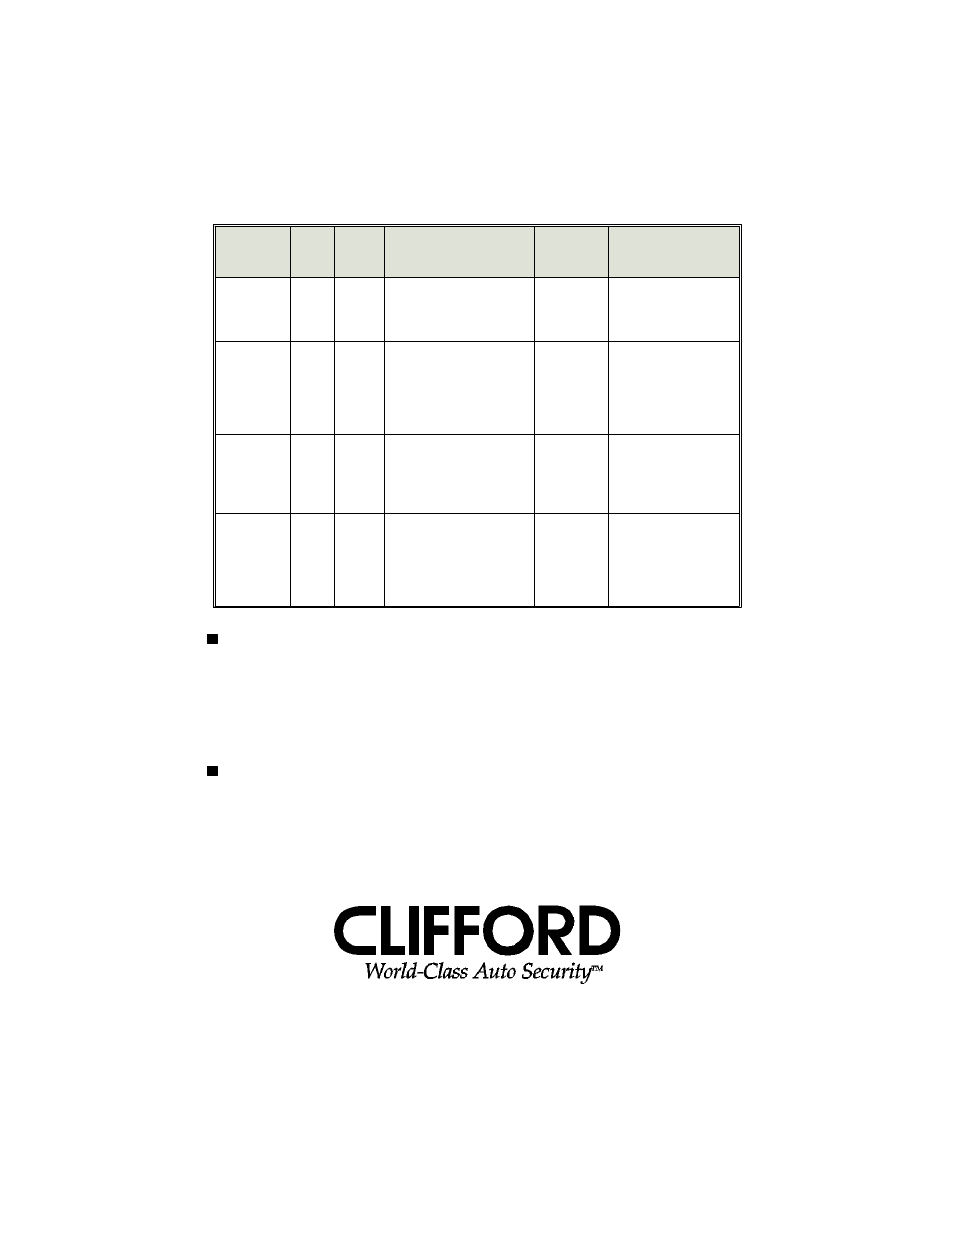 User-programmable remote controls | CLIFFORD XL1000 User Manual | Page